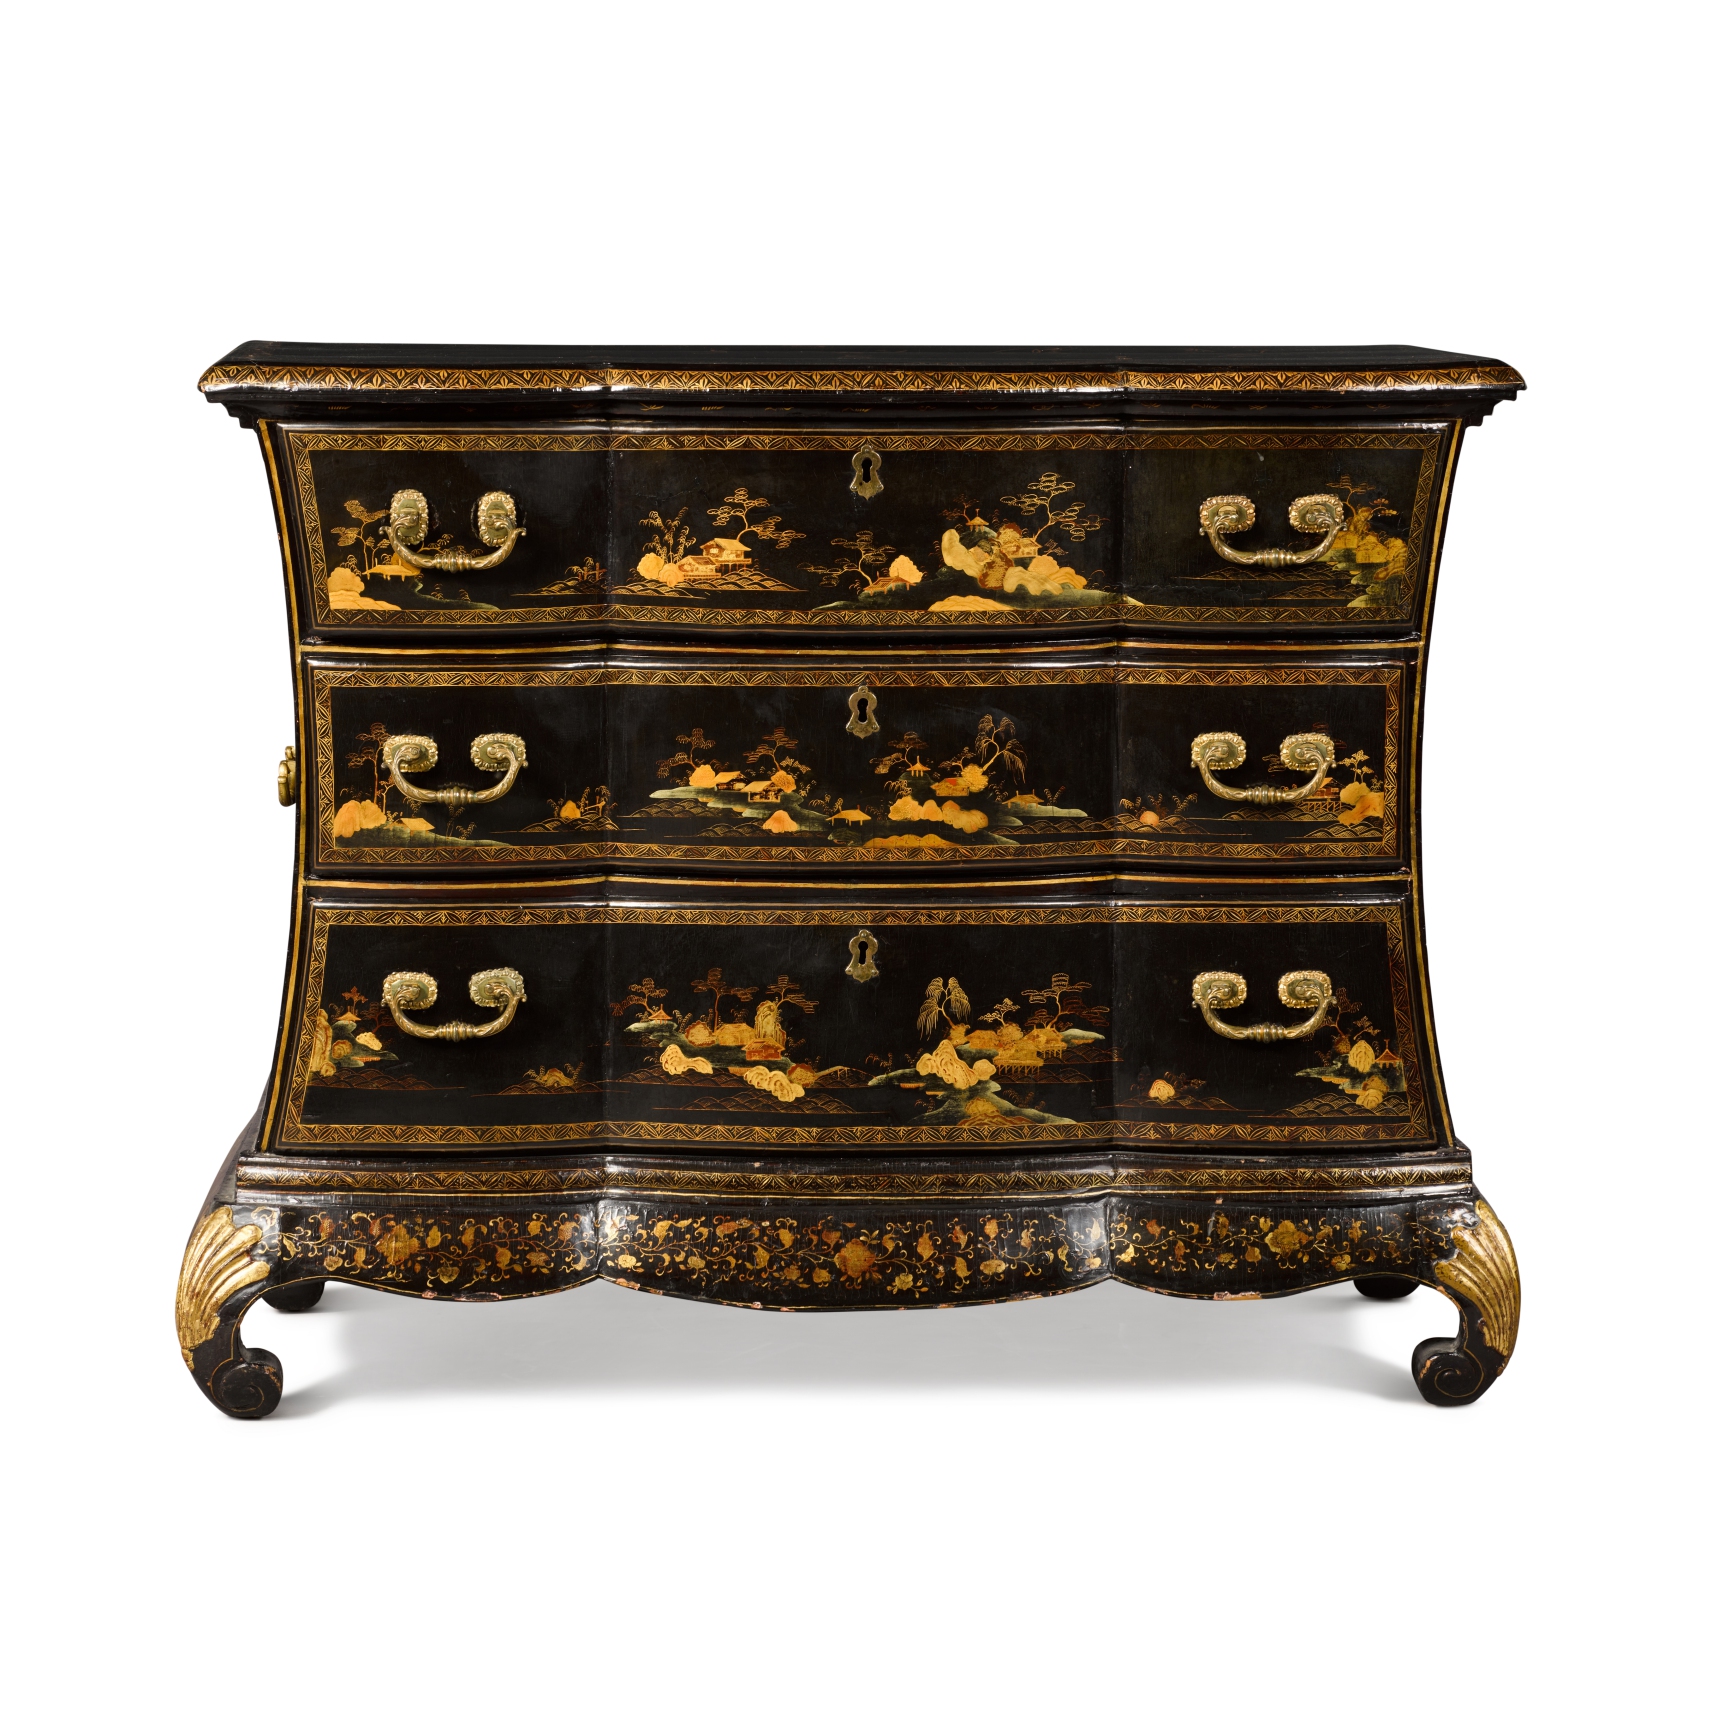 A Chinese export black gilt and polychrome lacquer commode, mid-18th century - Image 2 of 6